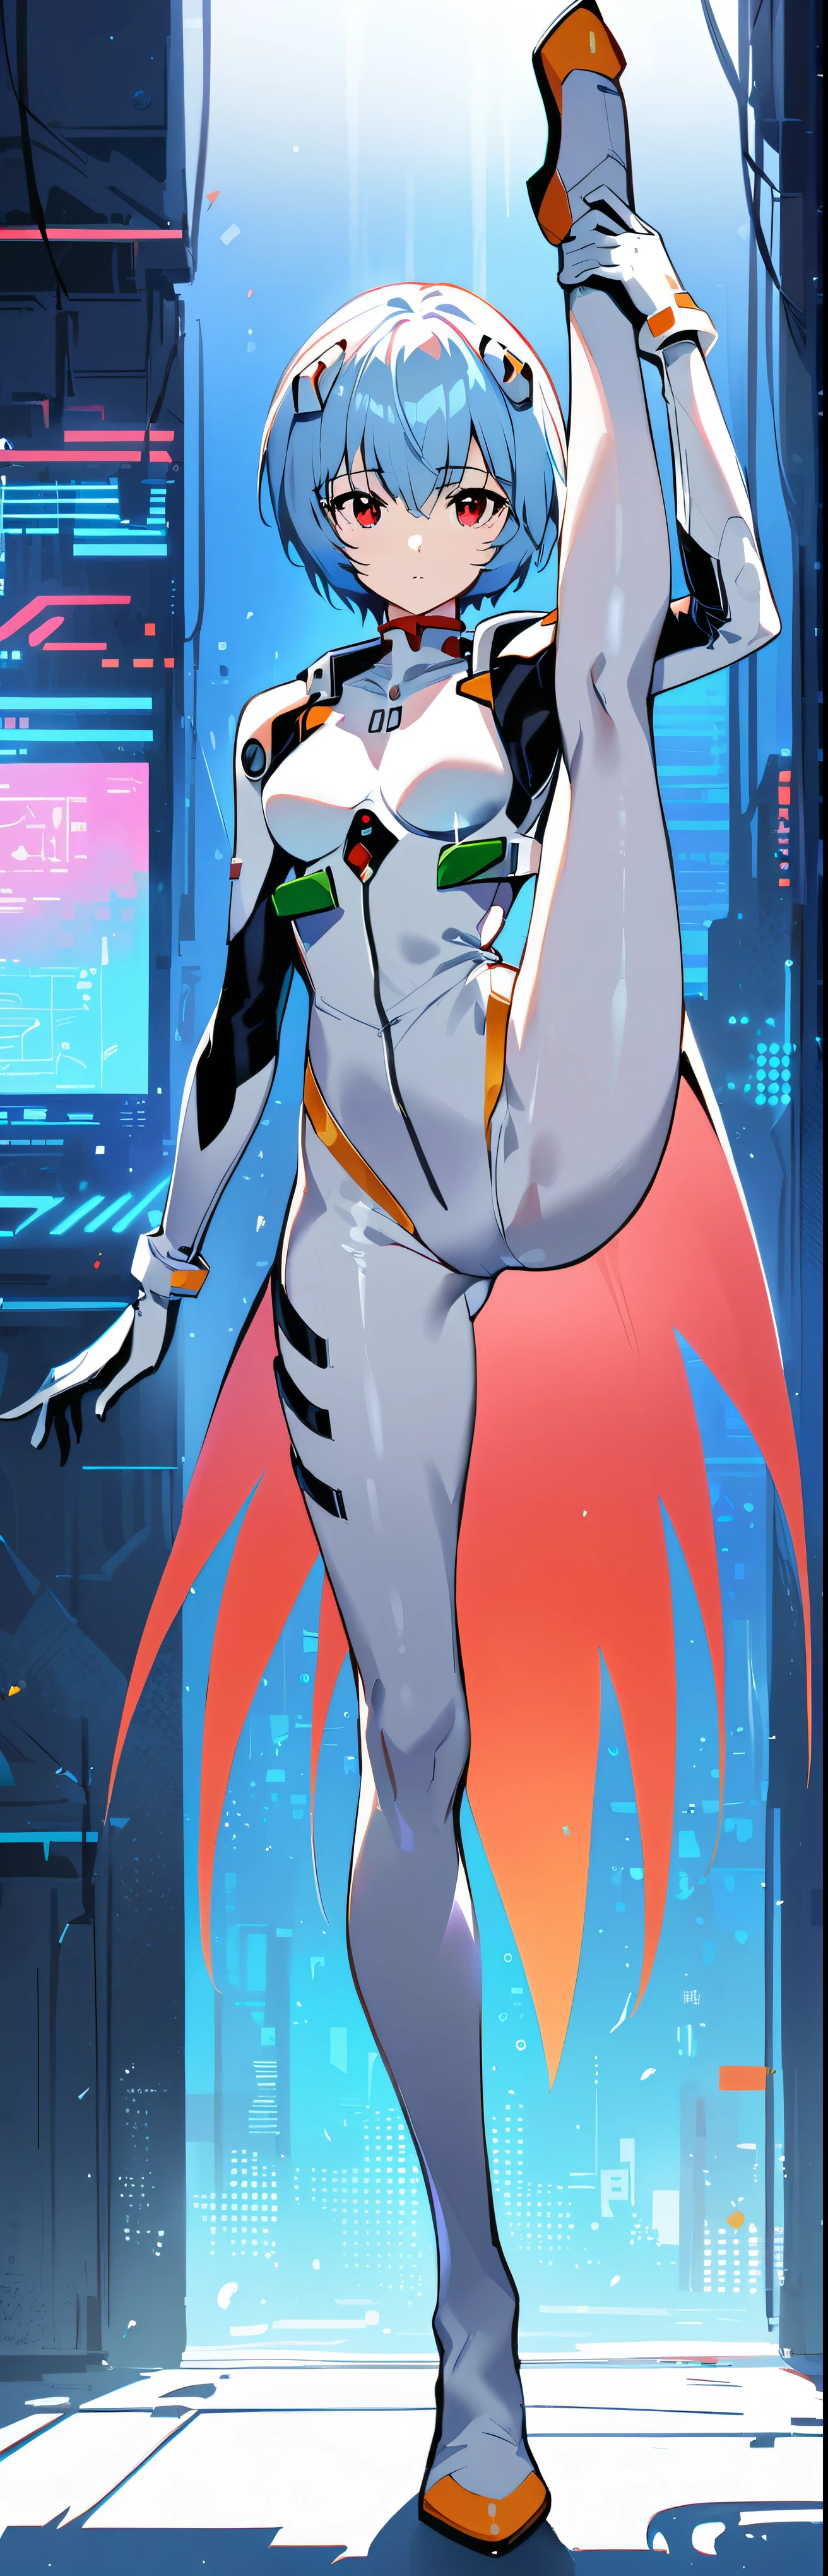 (highest quality:1.2),1 girl,alone,Are standing_Split,AYANAMI REI,white bodysuit,red eyes,pilot suit,short hair,blue hair,bangs,interface headset,turtleneck,hair between eyes,pixelated background,neon light,SF color scheme,Bright colors,metallic texture,detailed shading,Holographic interface,dark atmosphere,high contrast,sharp focus,twig of hair,Reflective surface,exquisite details,High resolution,studio lighting,Red accents,Illuminated environment,artificial intelligence assistant